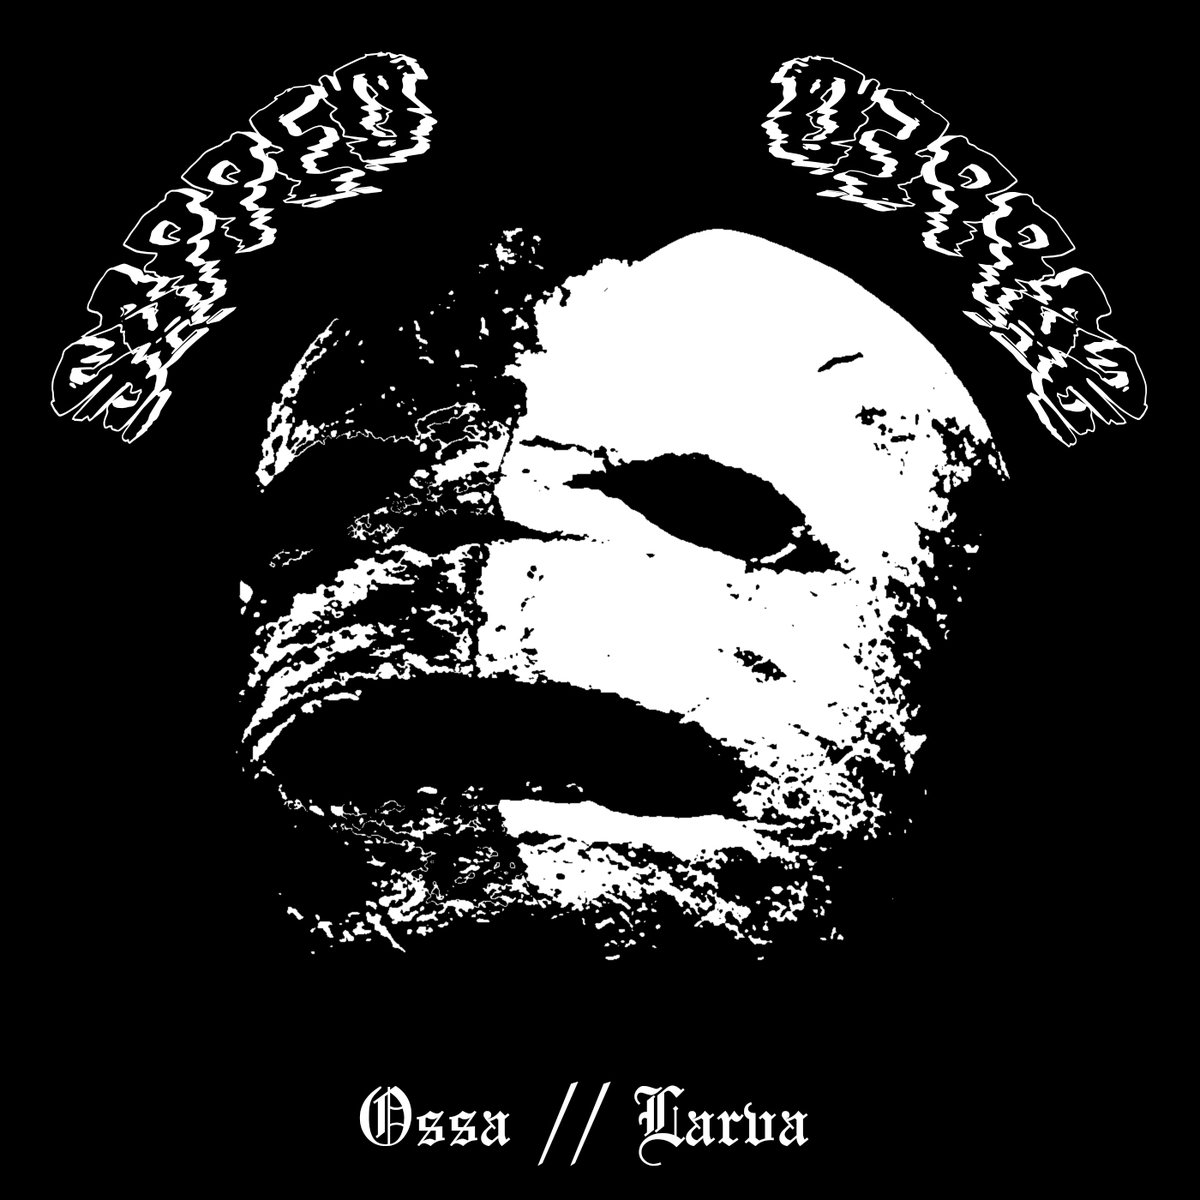 ⸸⛧⸸ Spotlight on Sapped! 📸 Follow them on Instagram: @allsapped Bandcamp: sapped.bandcamp.com  🔊 Support independent black metal and let the darkness embrace you! #BlackMetal #GothicVibes #MelodicBlackMetal #Sapped #CataloniaBlackMetal #UndergroundMusic